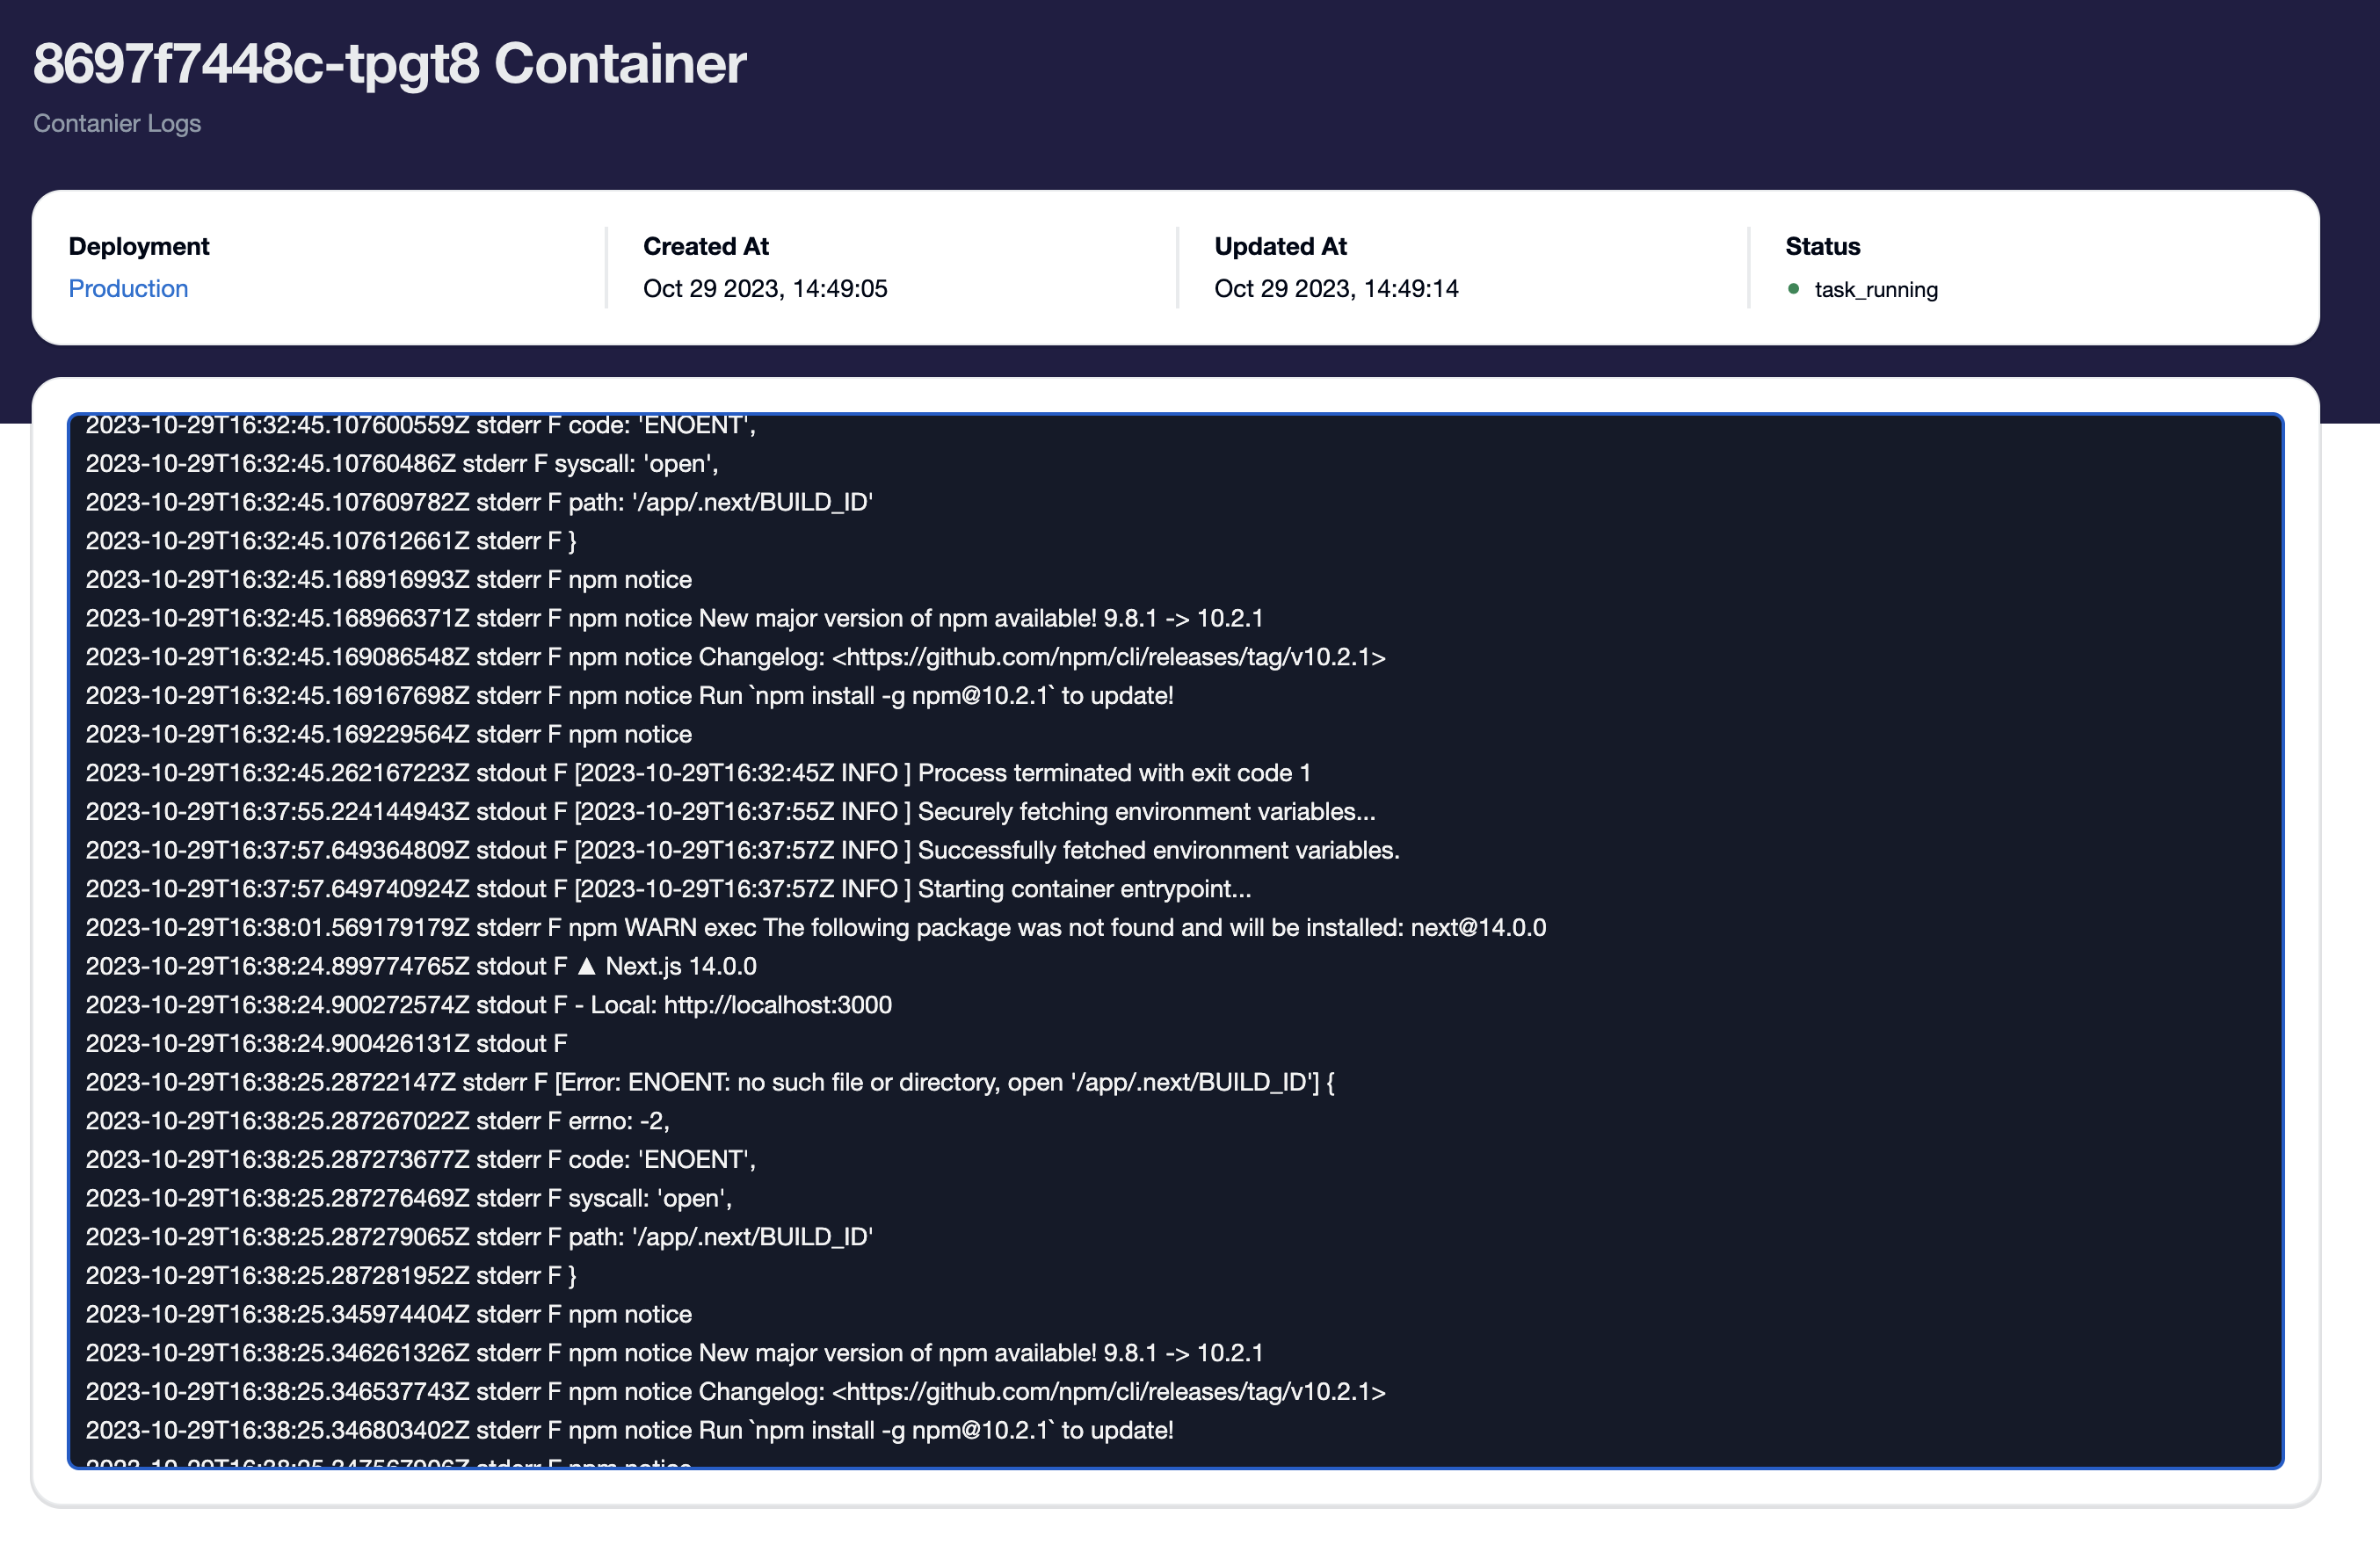 Live logs of a running container